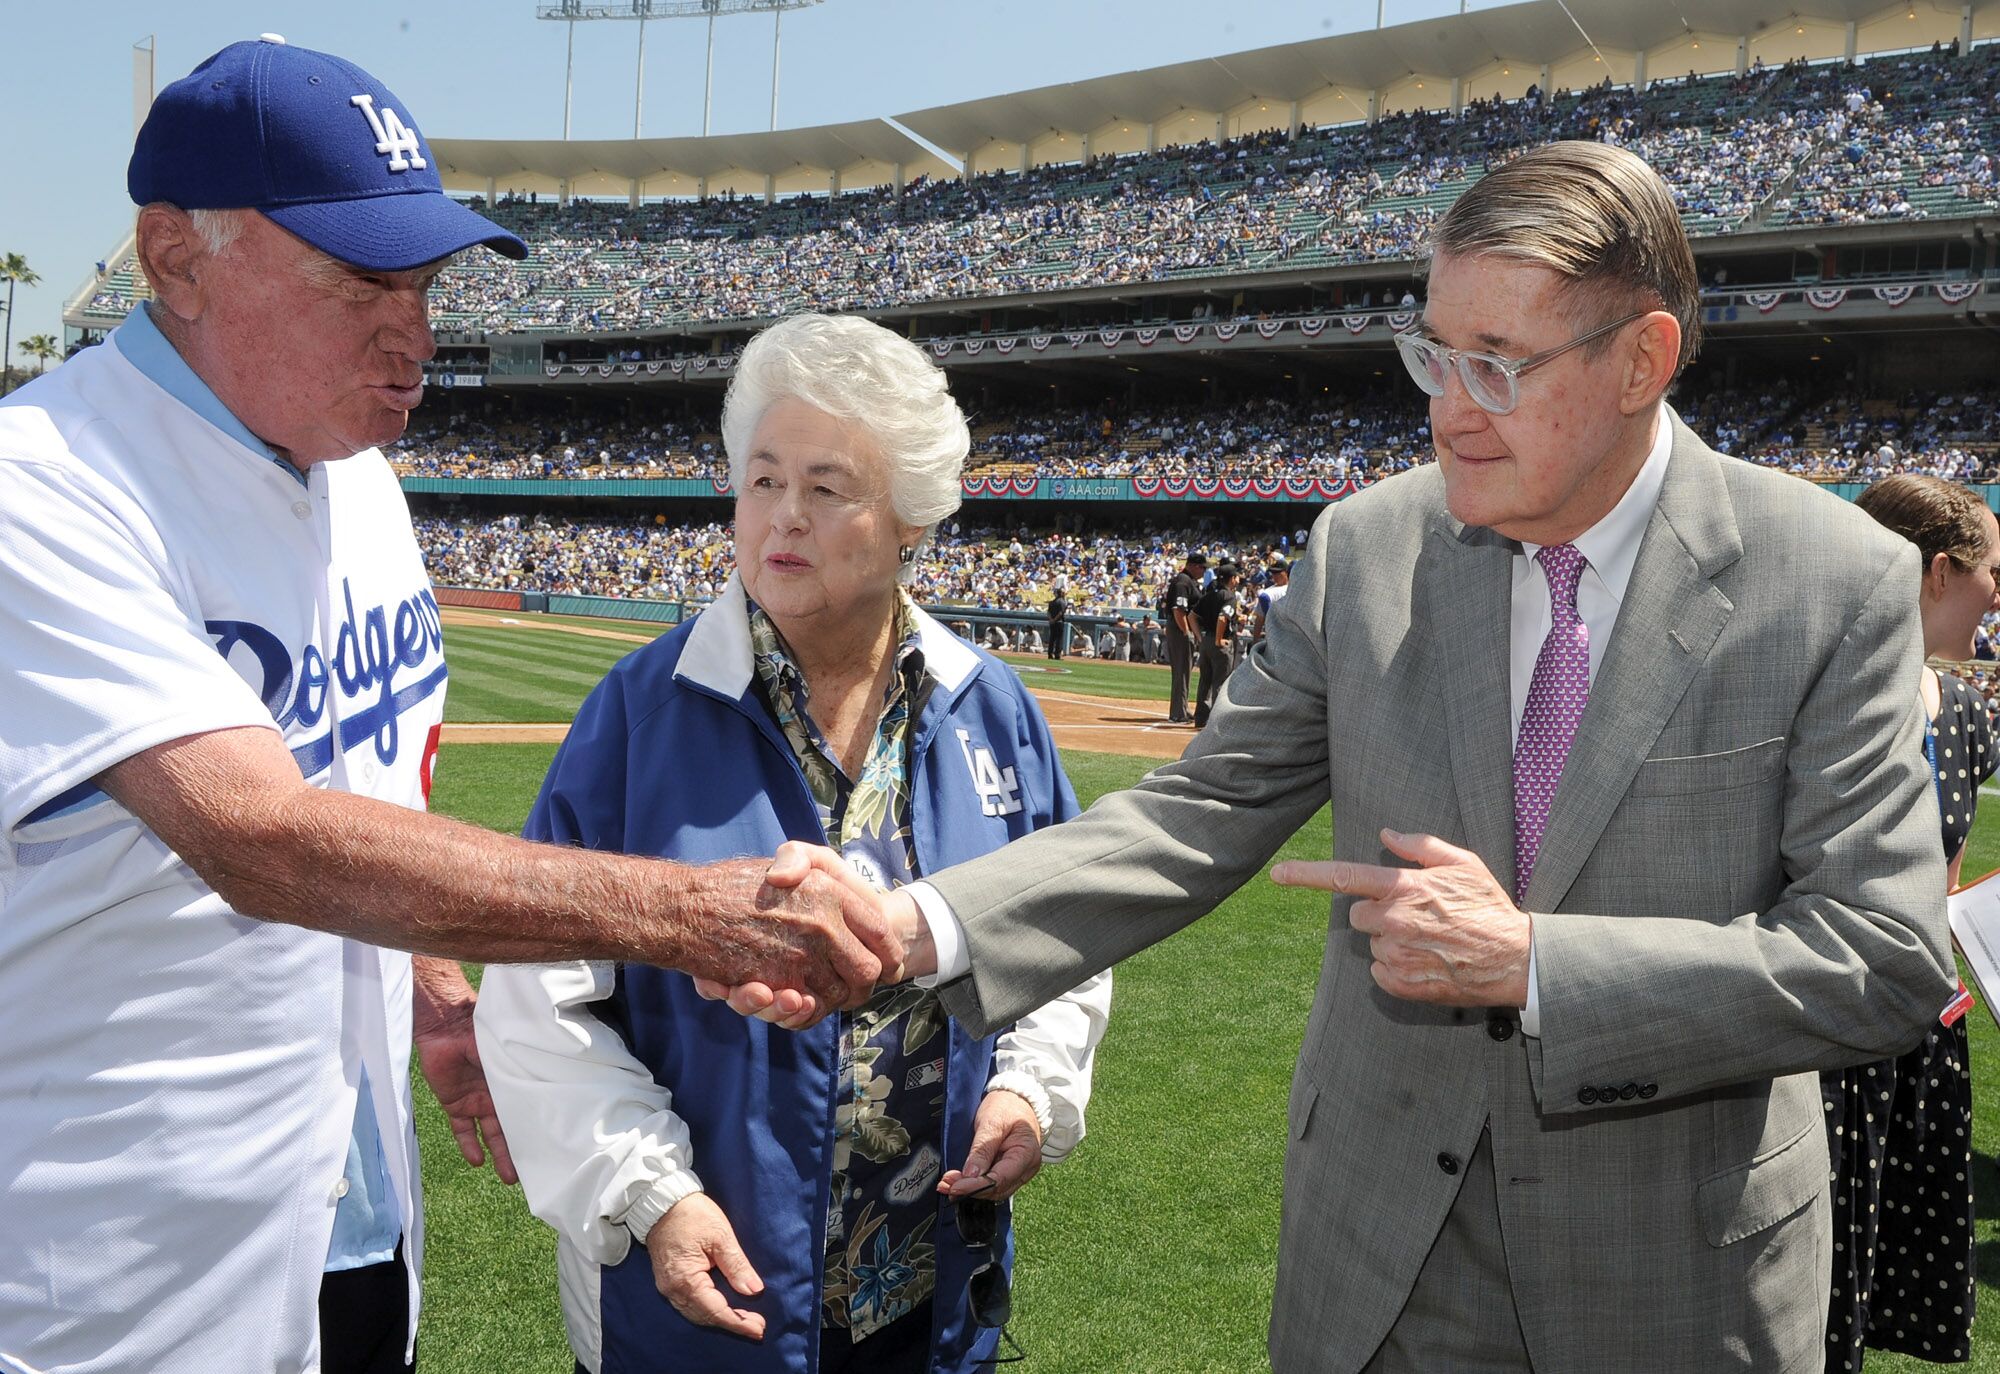 Roz Wyman, former Los Angeles City Council member who started at age 22 in 1953 help bring the Brooklyn Dodgers to L.A.